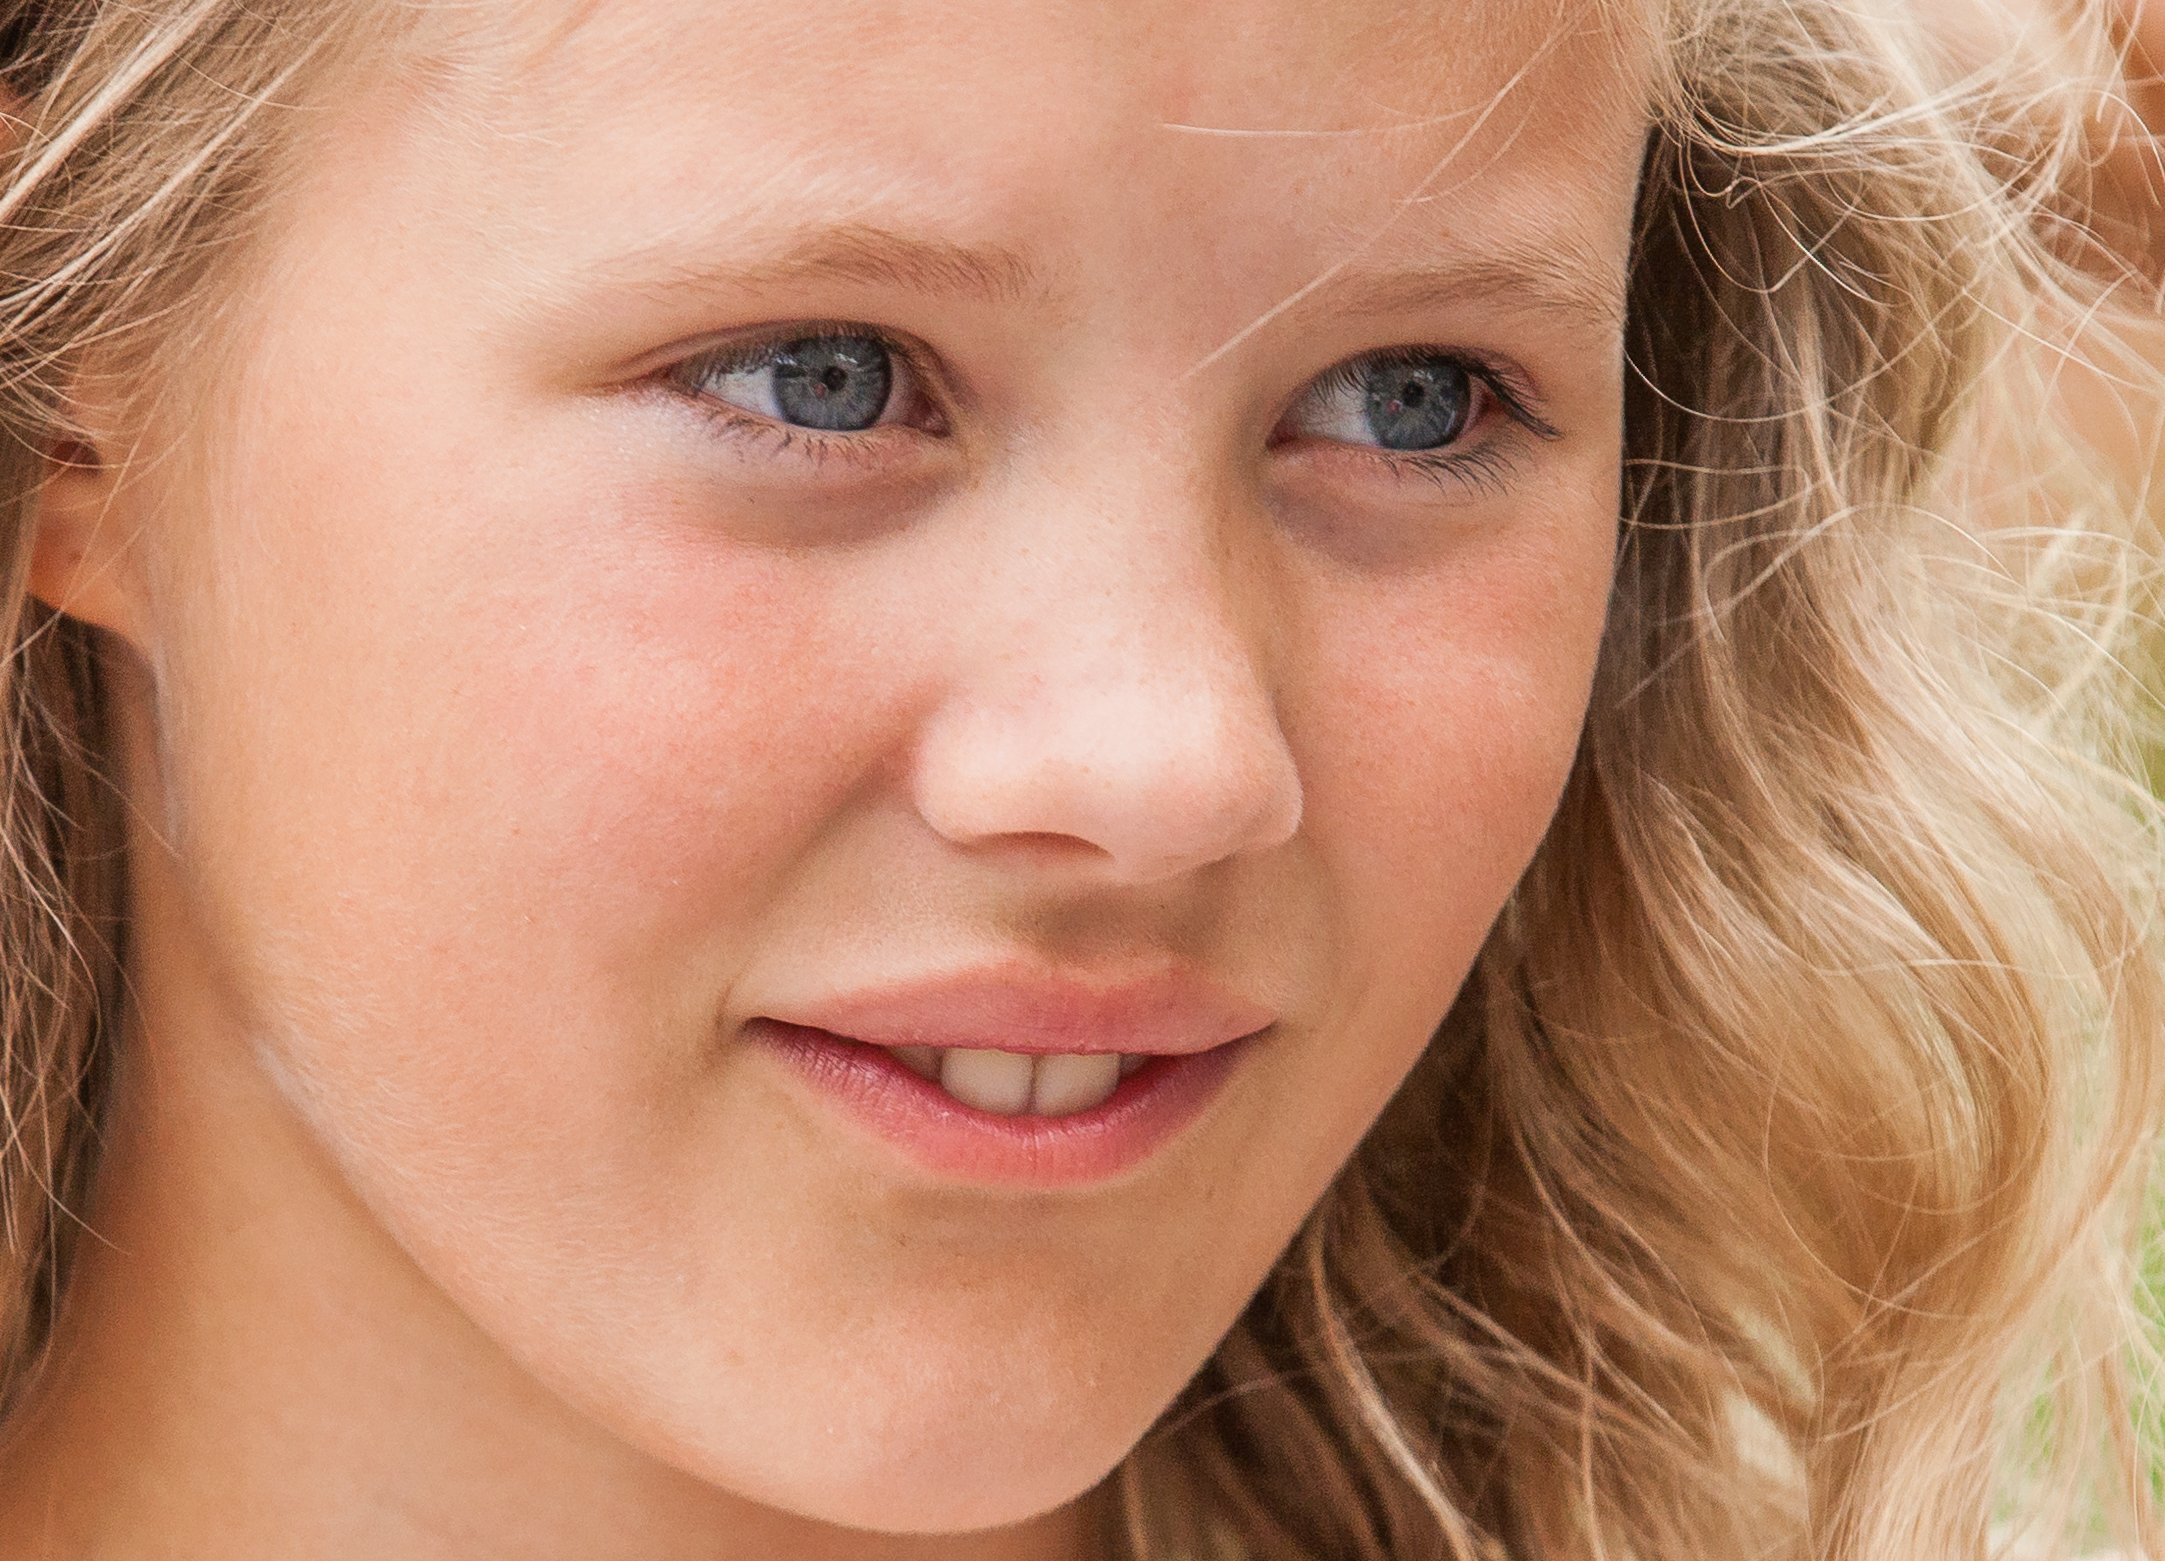 a blond beautiful girl photographed in Sigtuna, Sweden in June 2014, picture 13 out 20